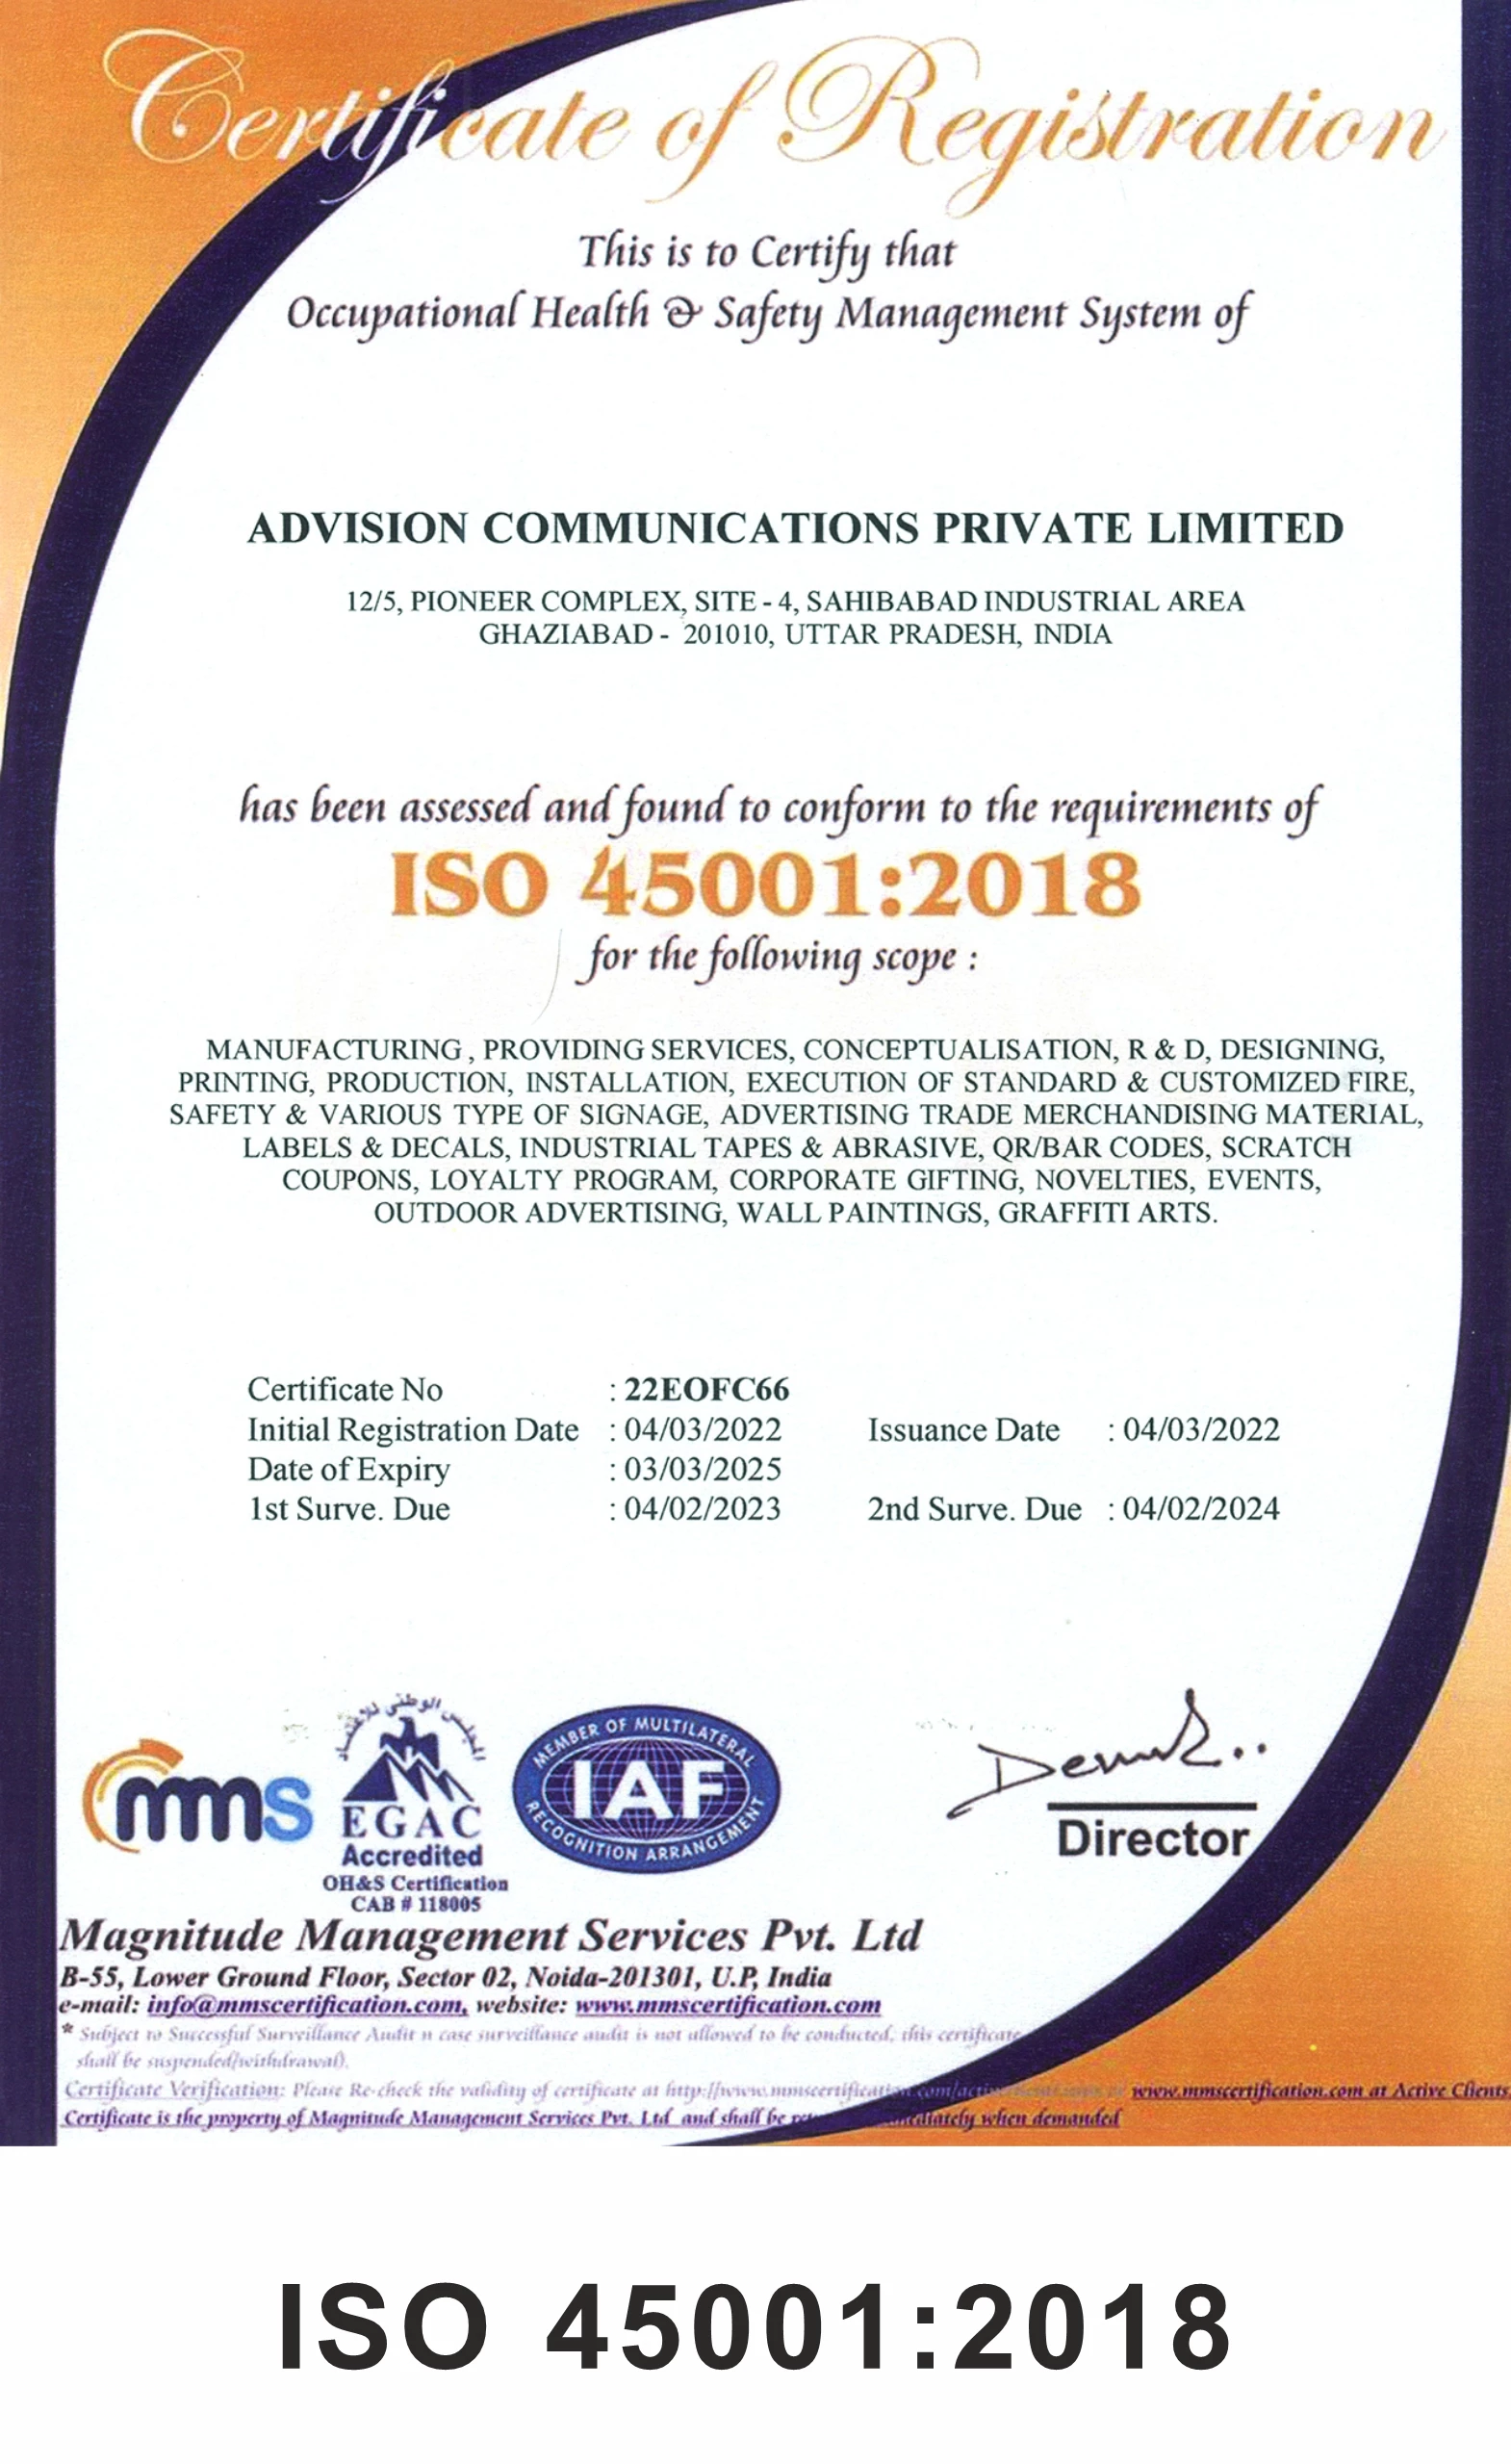 ISO 45001 x 2018 certificate